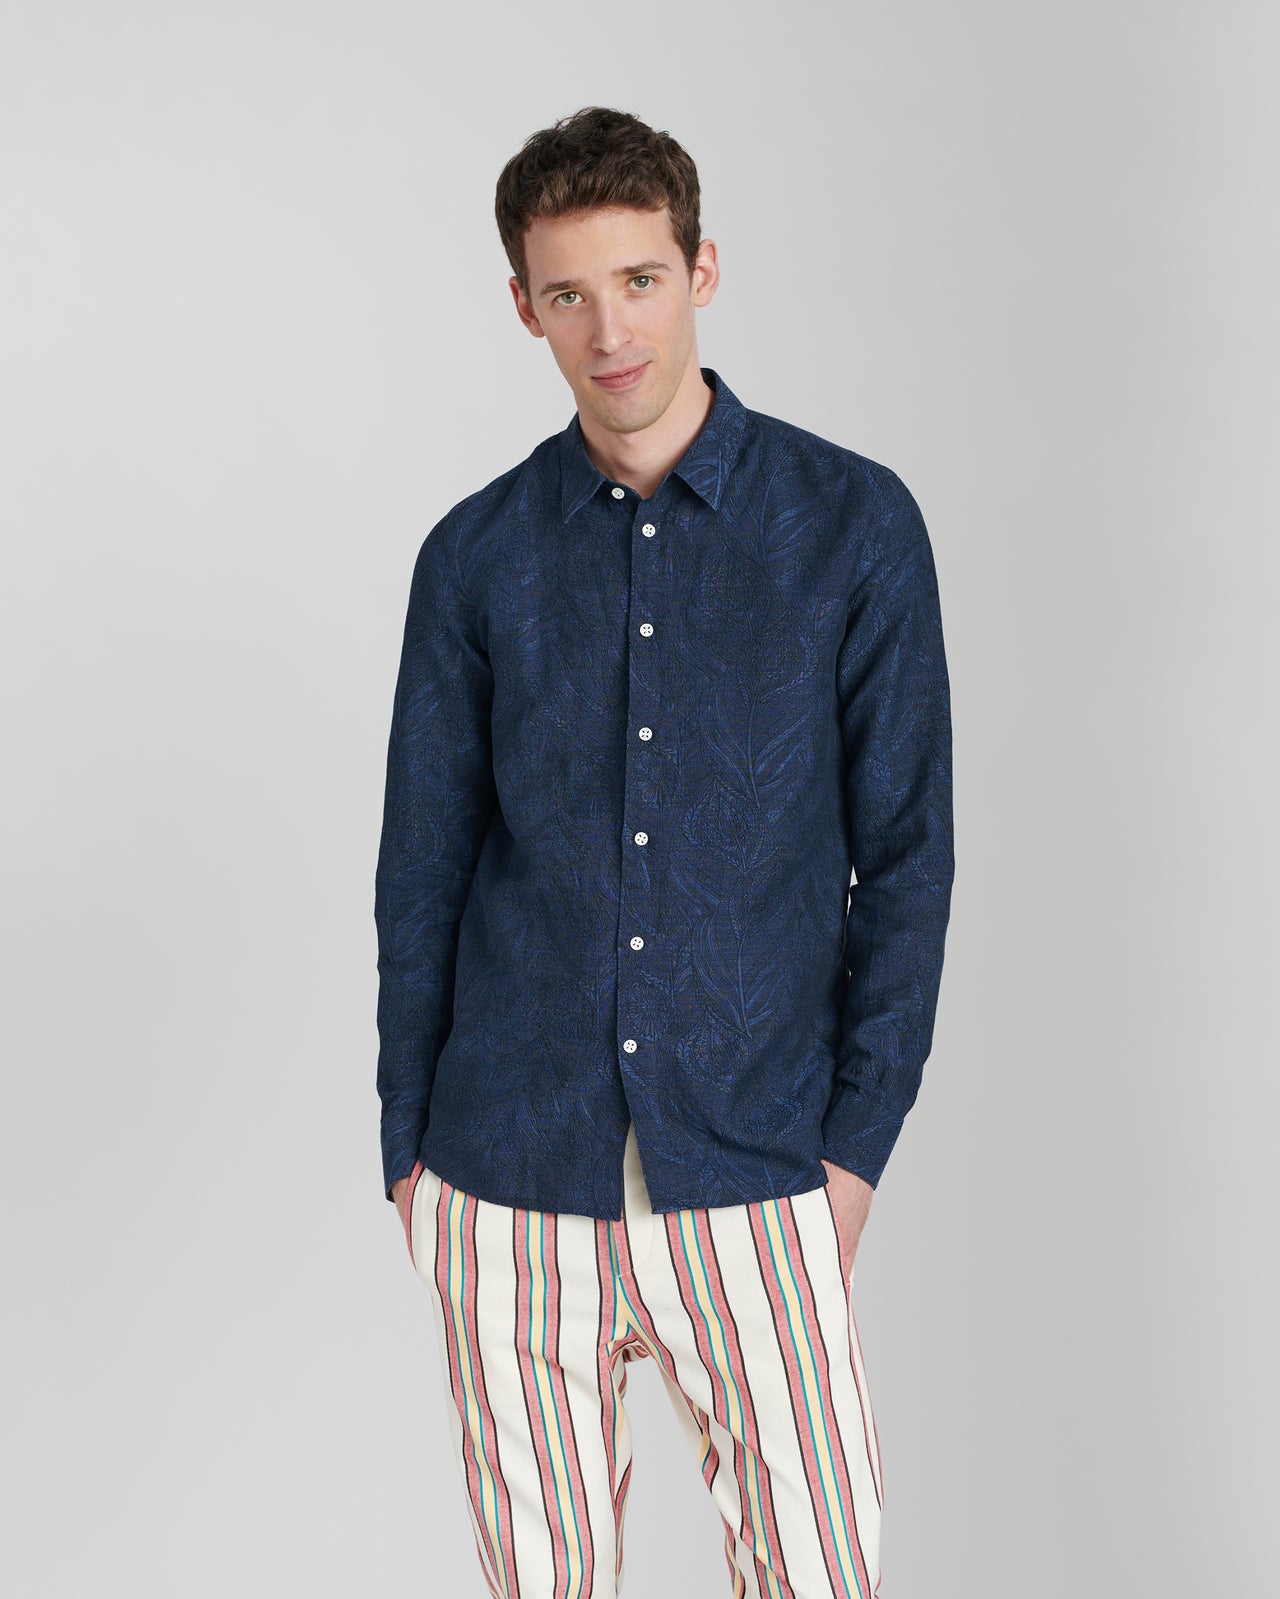 Feel Good Shirt in a Navy Blue Jacquard Italian Cotton and Linen by the Historical mill Leggiuno